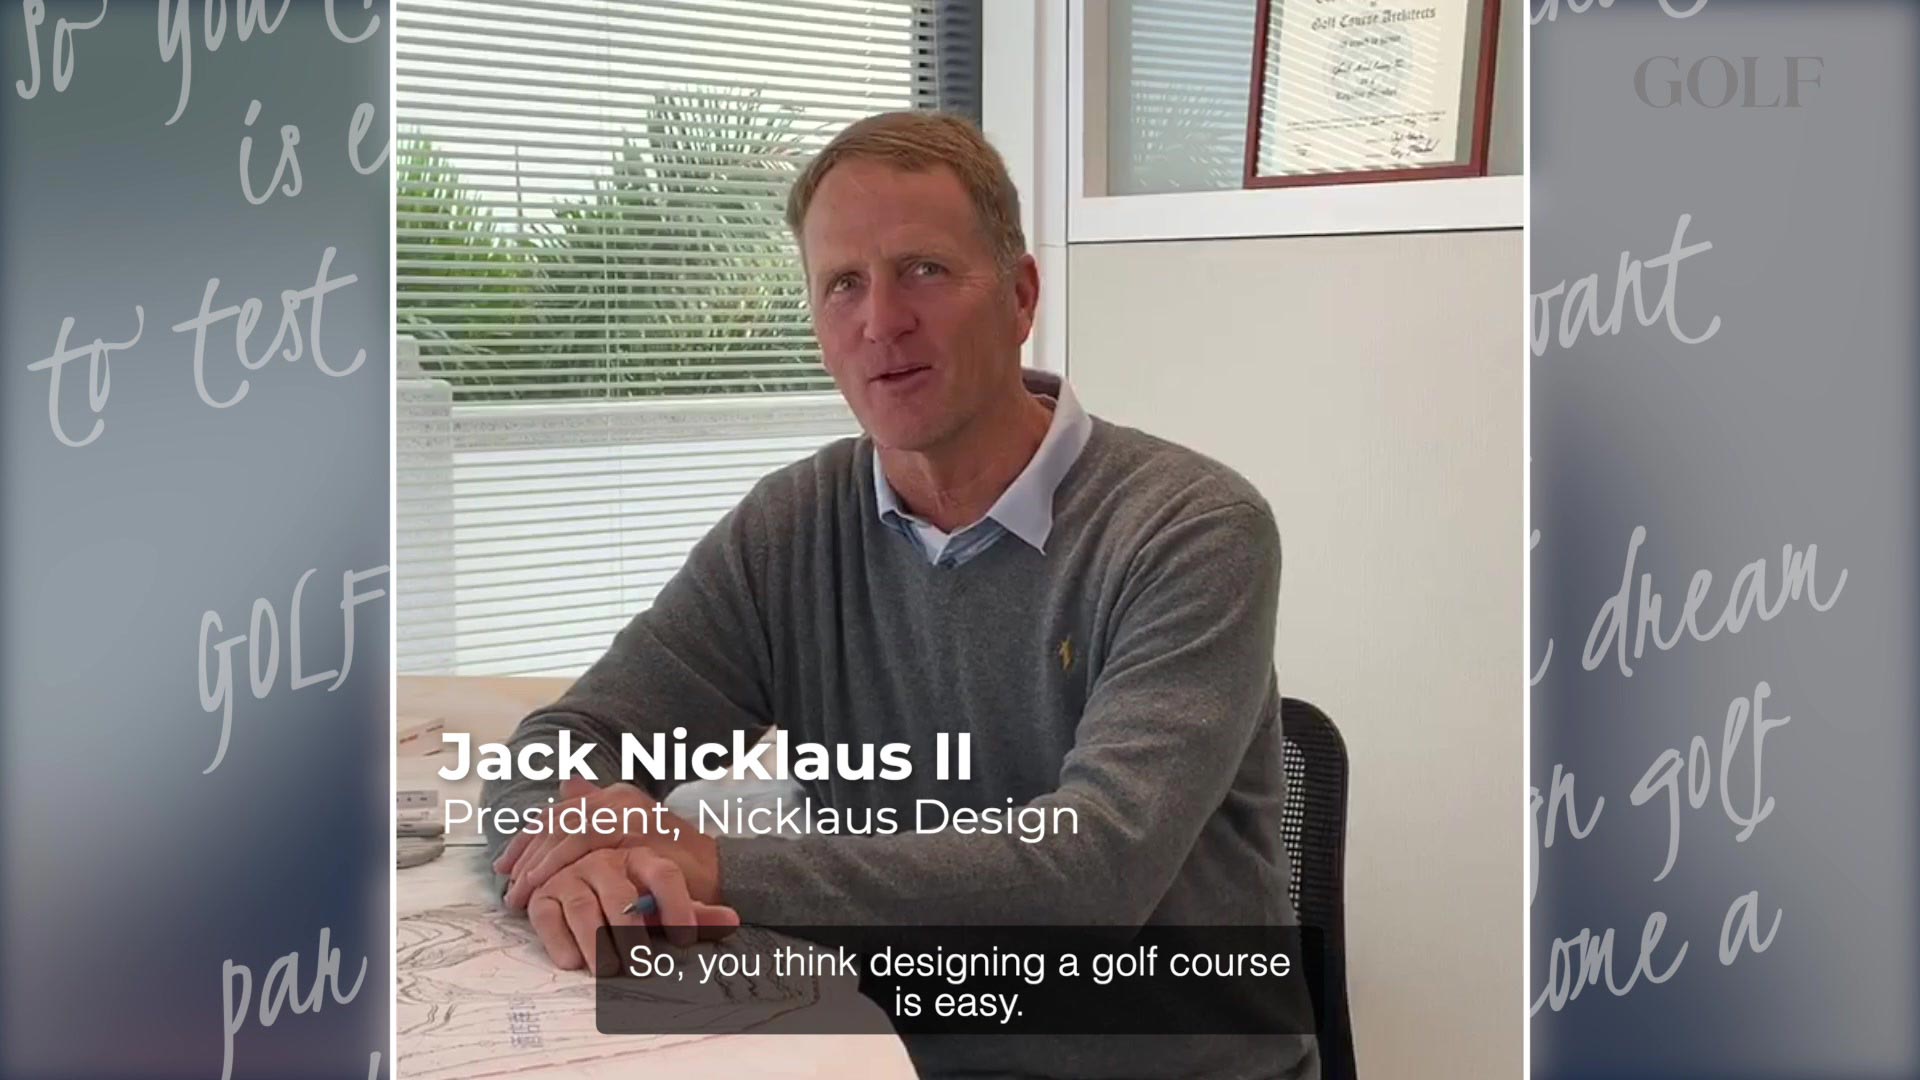 GOLF Magazine + Nicklaus Design Challenge now accepting submissions1920 x 1080